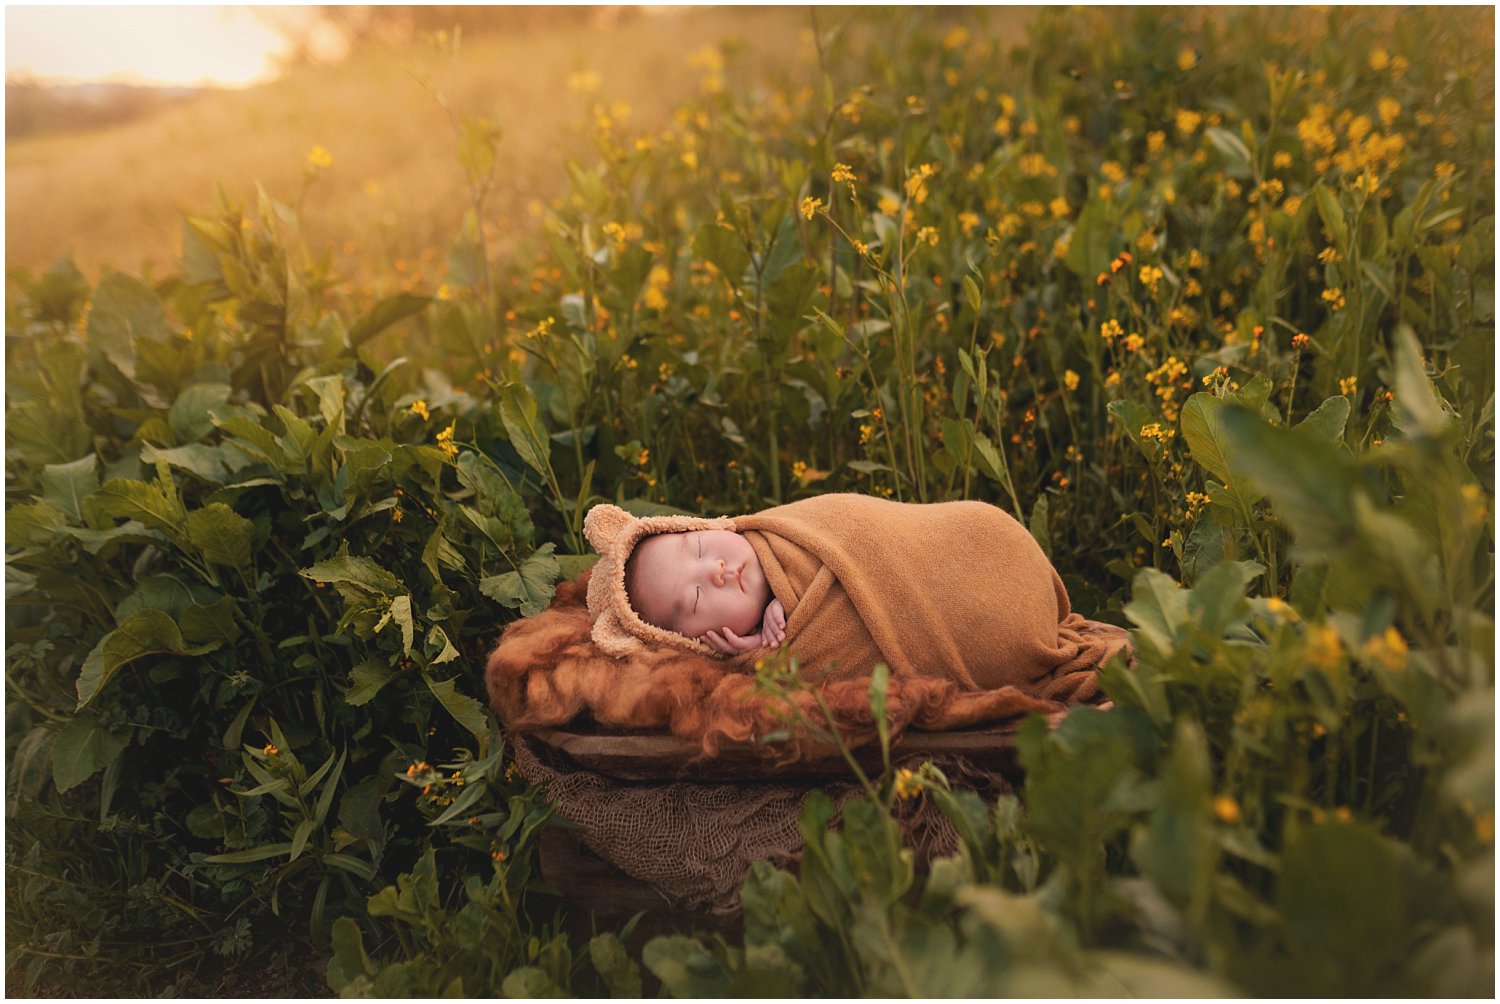 6 week baby boy sleeping outdoors by A pocket of Time Photography